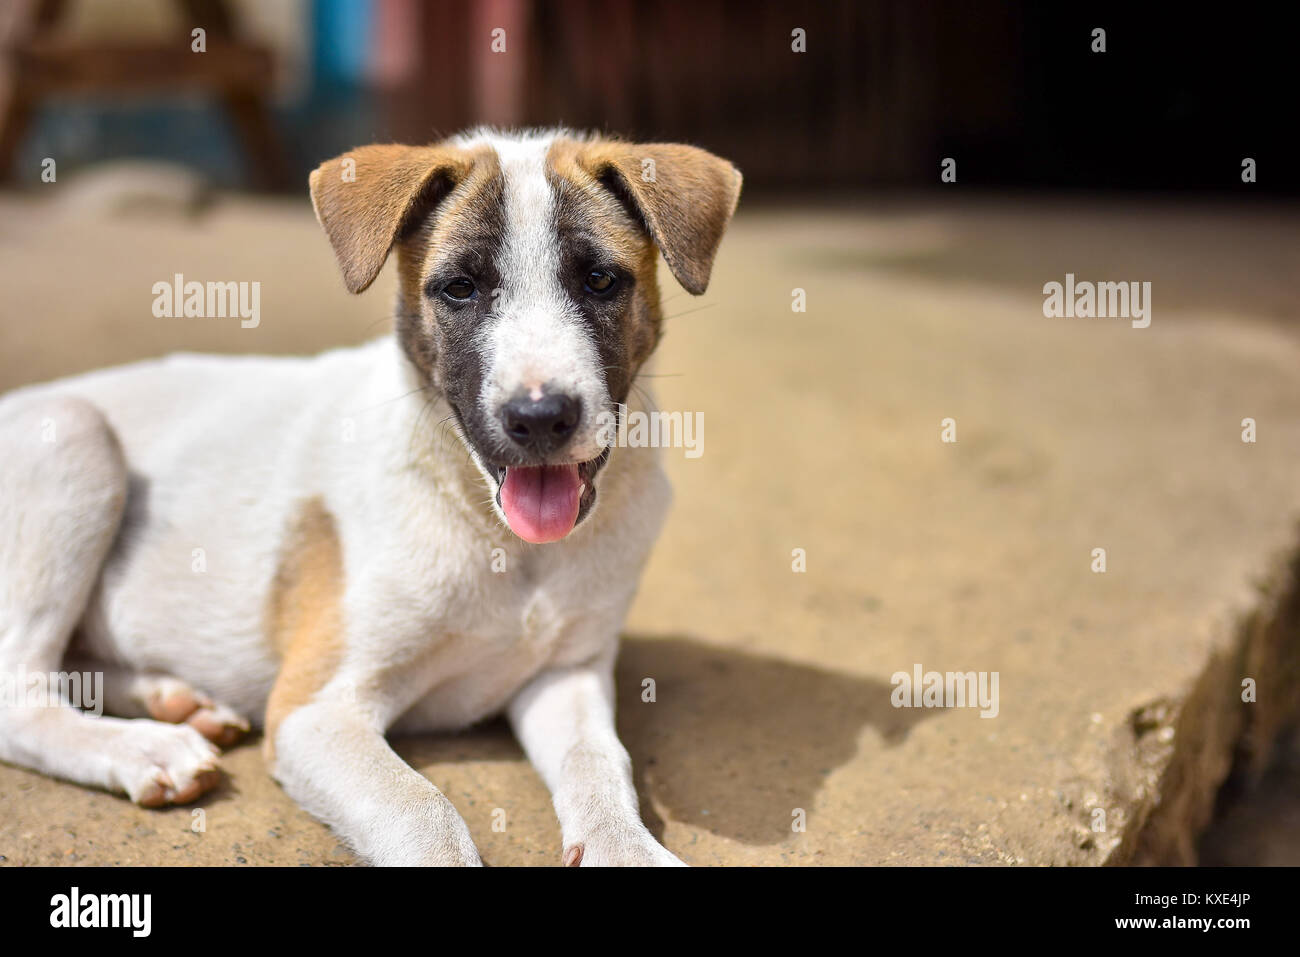 Young cute puppy dog with tongue out sat on concrete pathway to door outside on a sunny day. Stock Photo